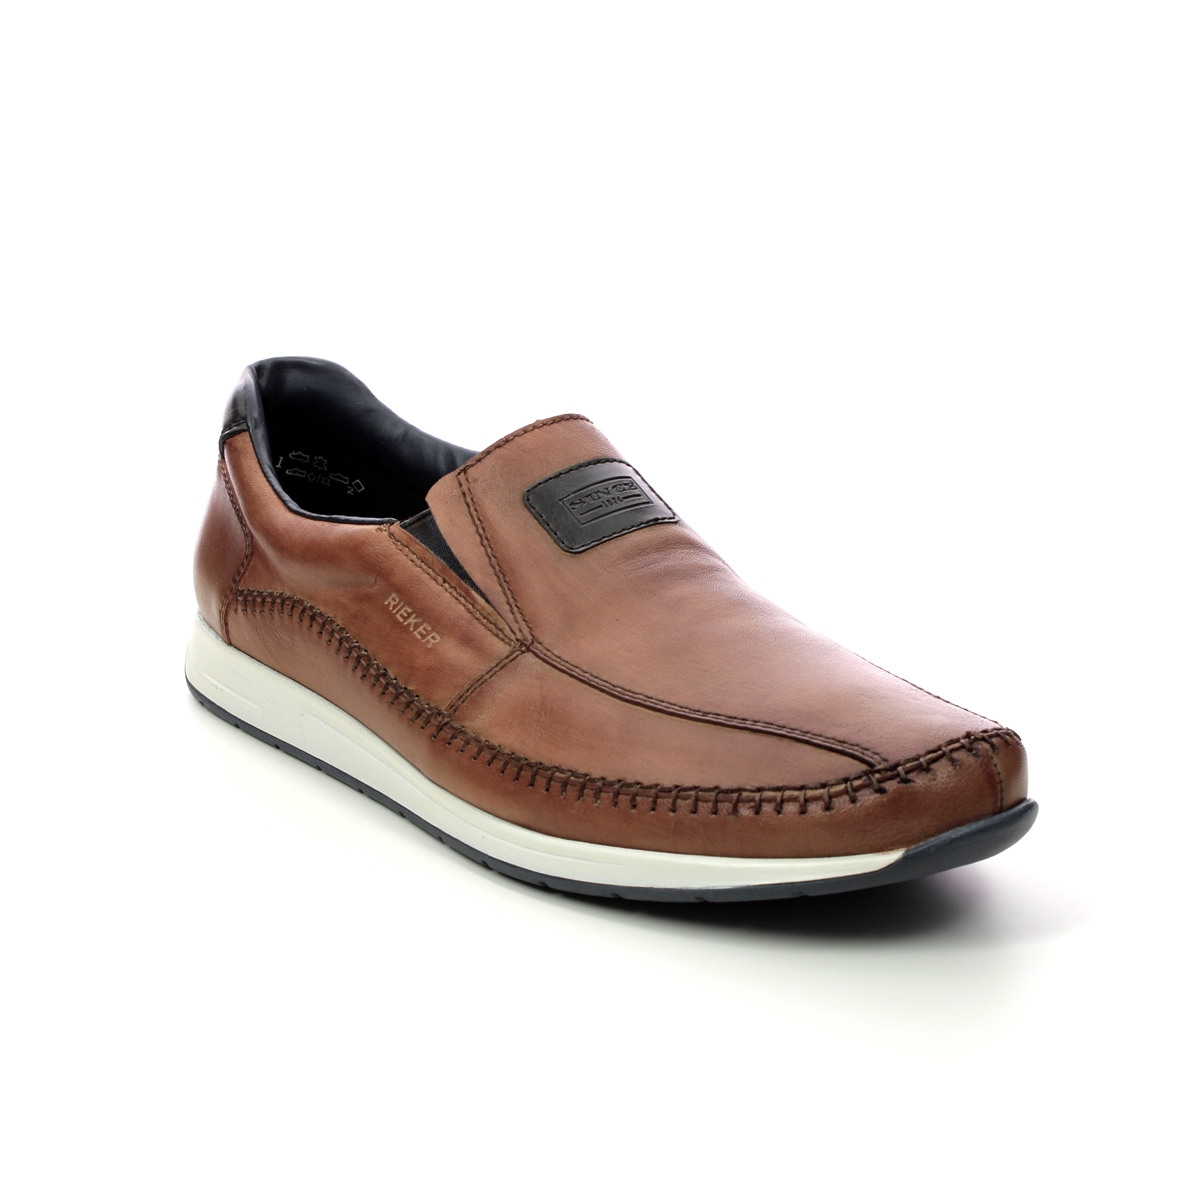 Rieker 11962-25 Tan Leather Mens Slip-on Shoes in a Plain Leather in Size 43